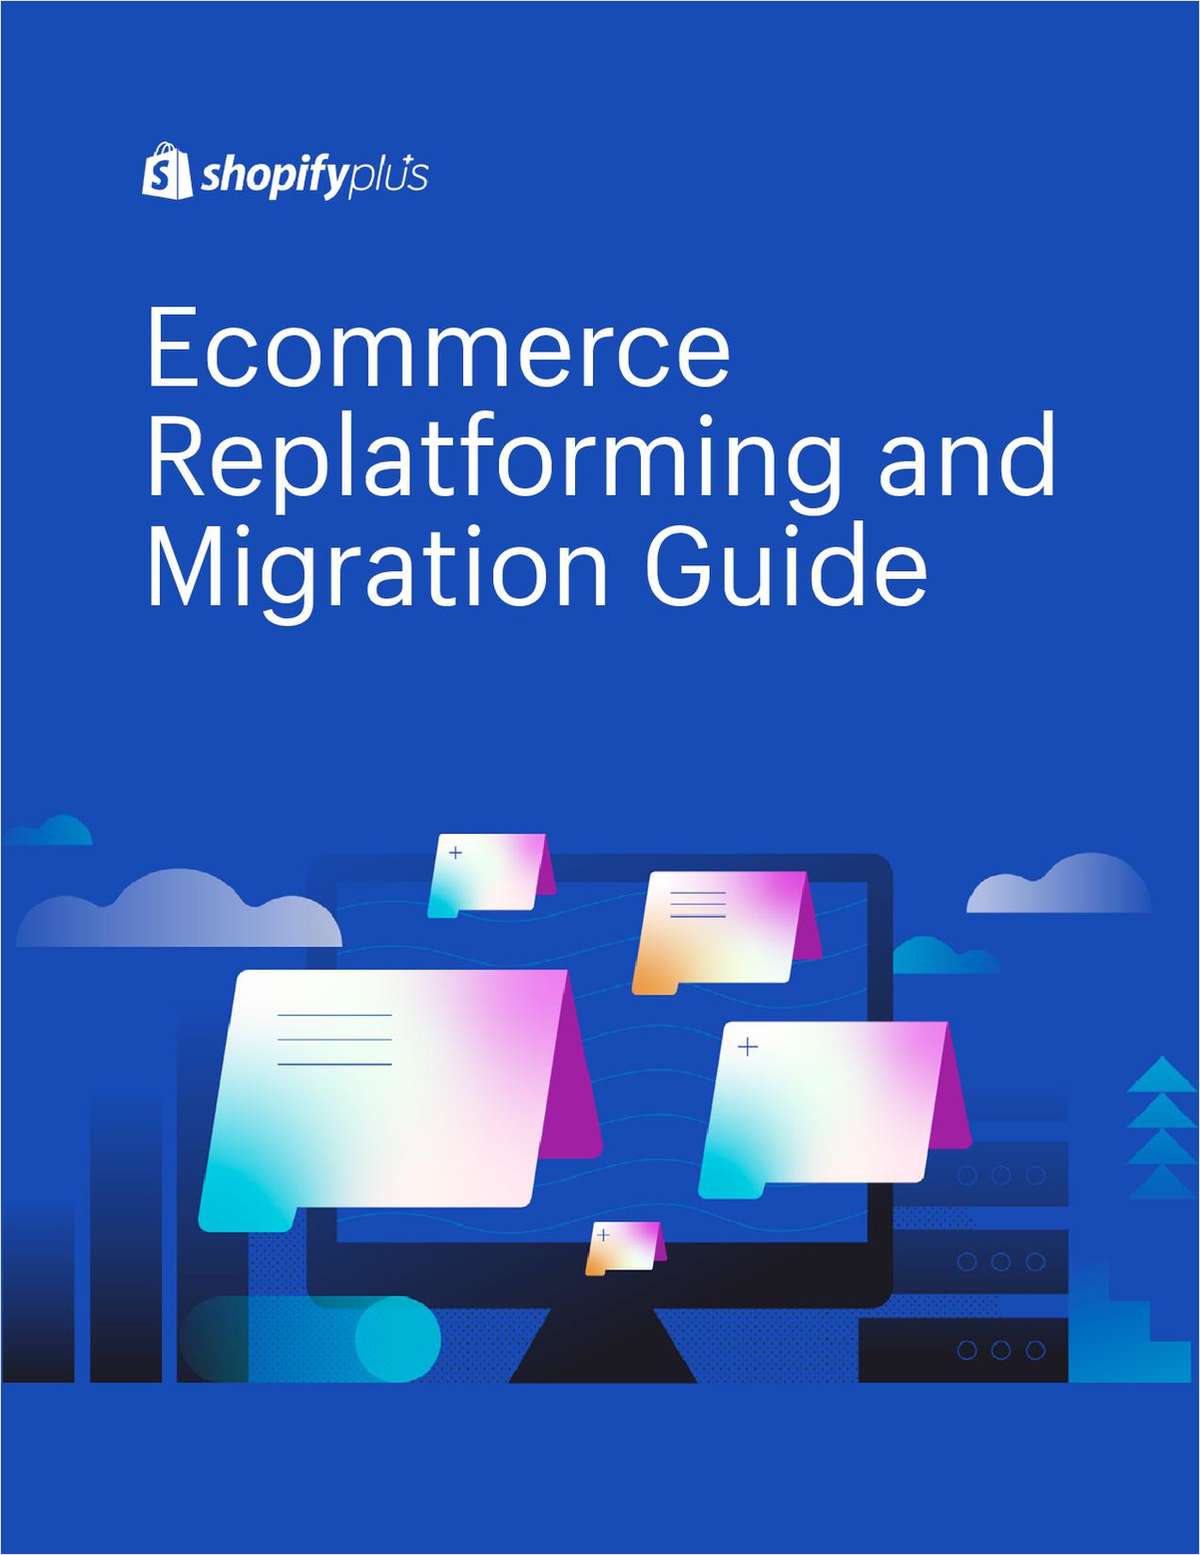 Set Yourself Up for Success: Learn to Navigate Ecommerce Migration and Replatforming